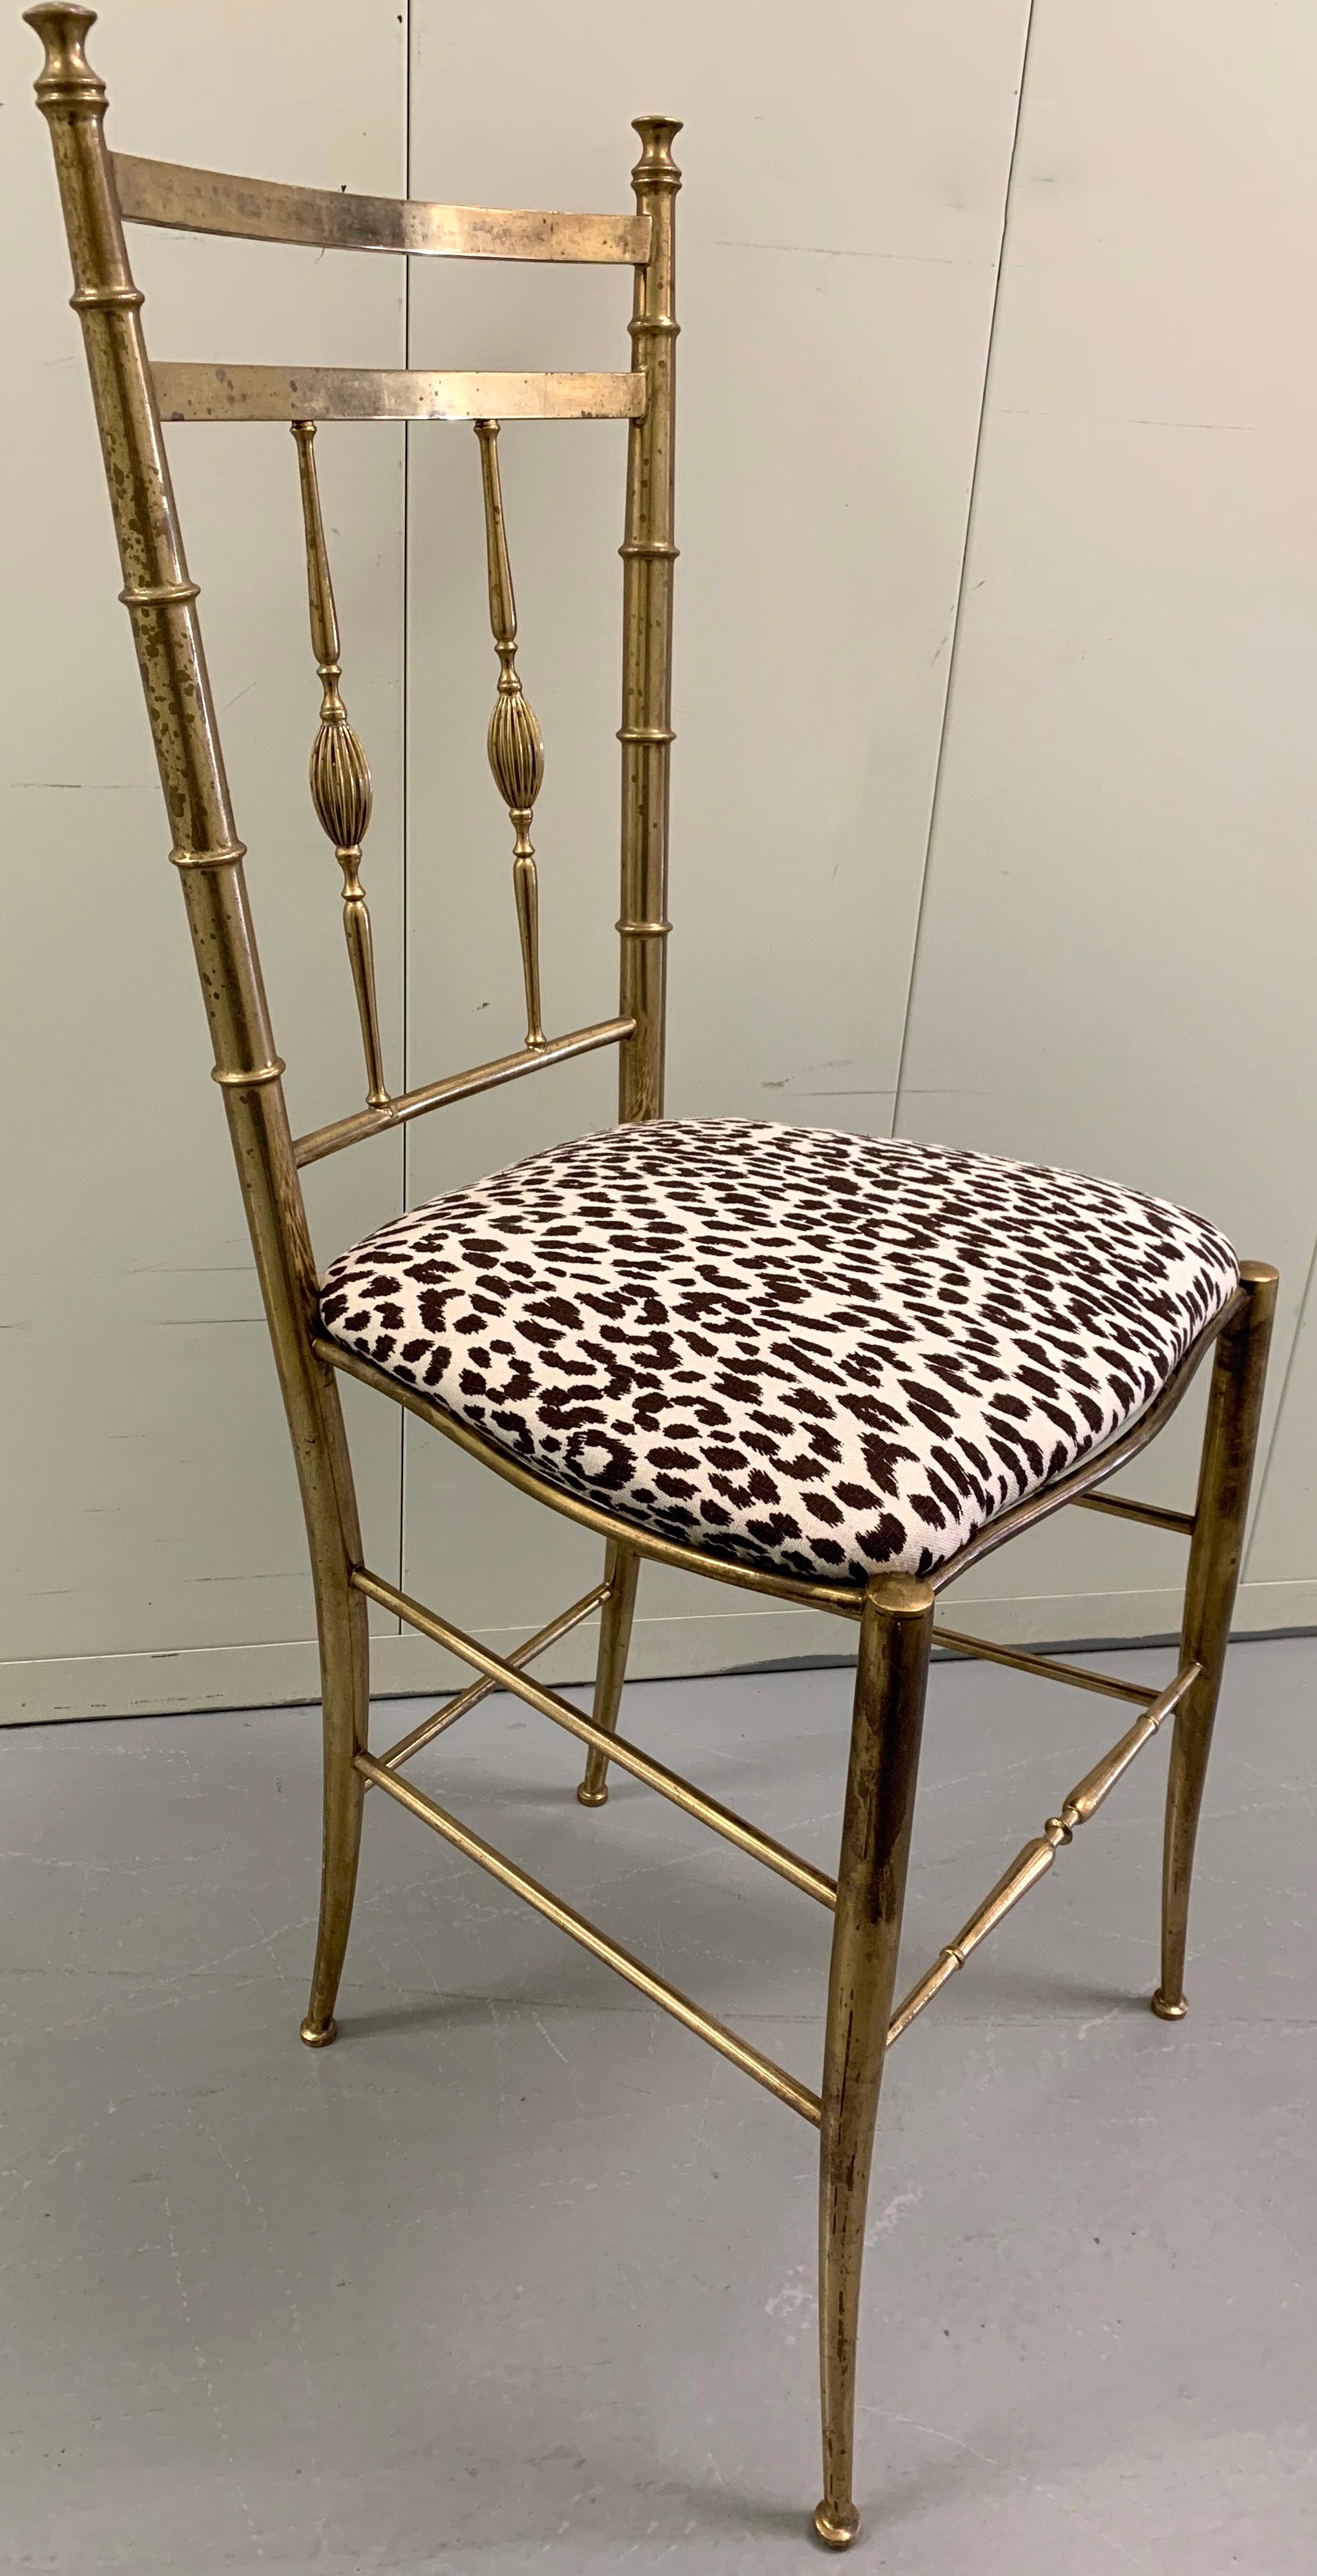 Italian brass Chiavari chair. New seat cushion newly upholstered in Raoul Textiles brown printed leopard linen fabric. Overall as found unpolished patina to the solid brass frame. Stamped ‘Made in Italy’ on the underside. Chair can be polished to a